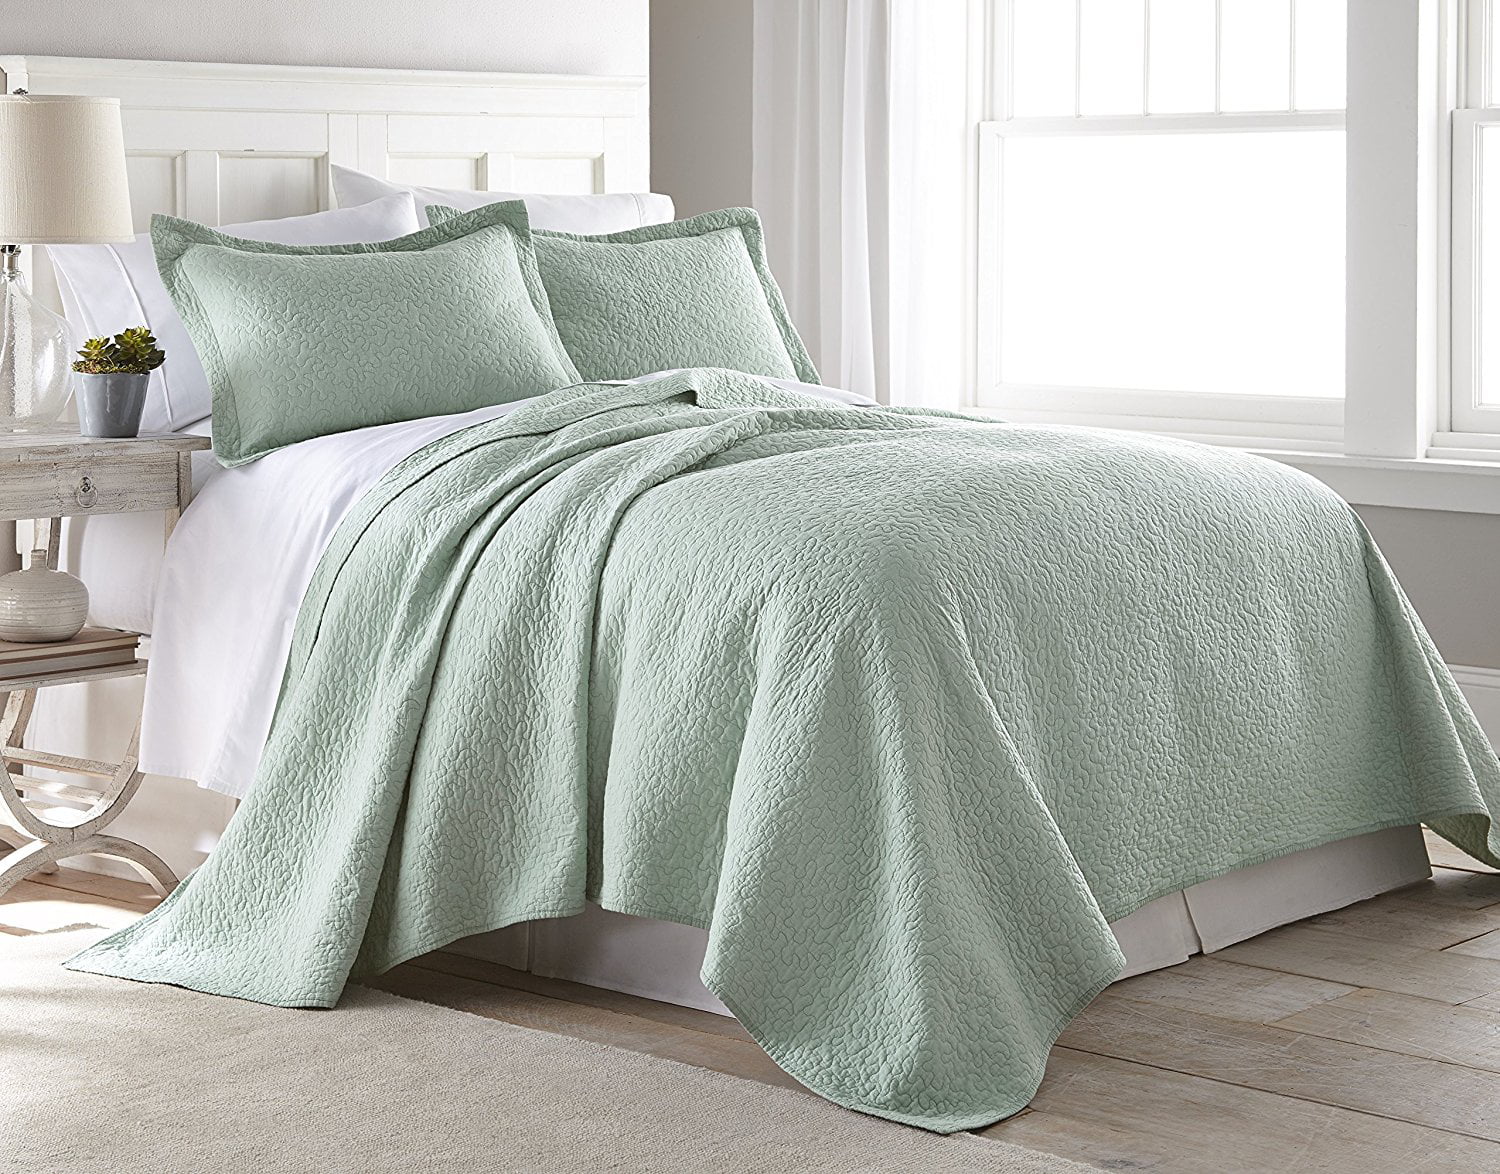 King Size Pre Washed Cotton Quilt Set, Seafoam Green Duvet Cover King Size